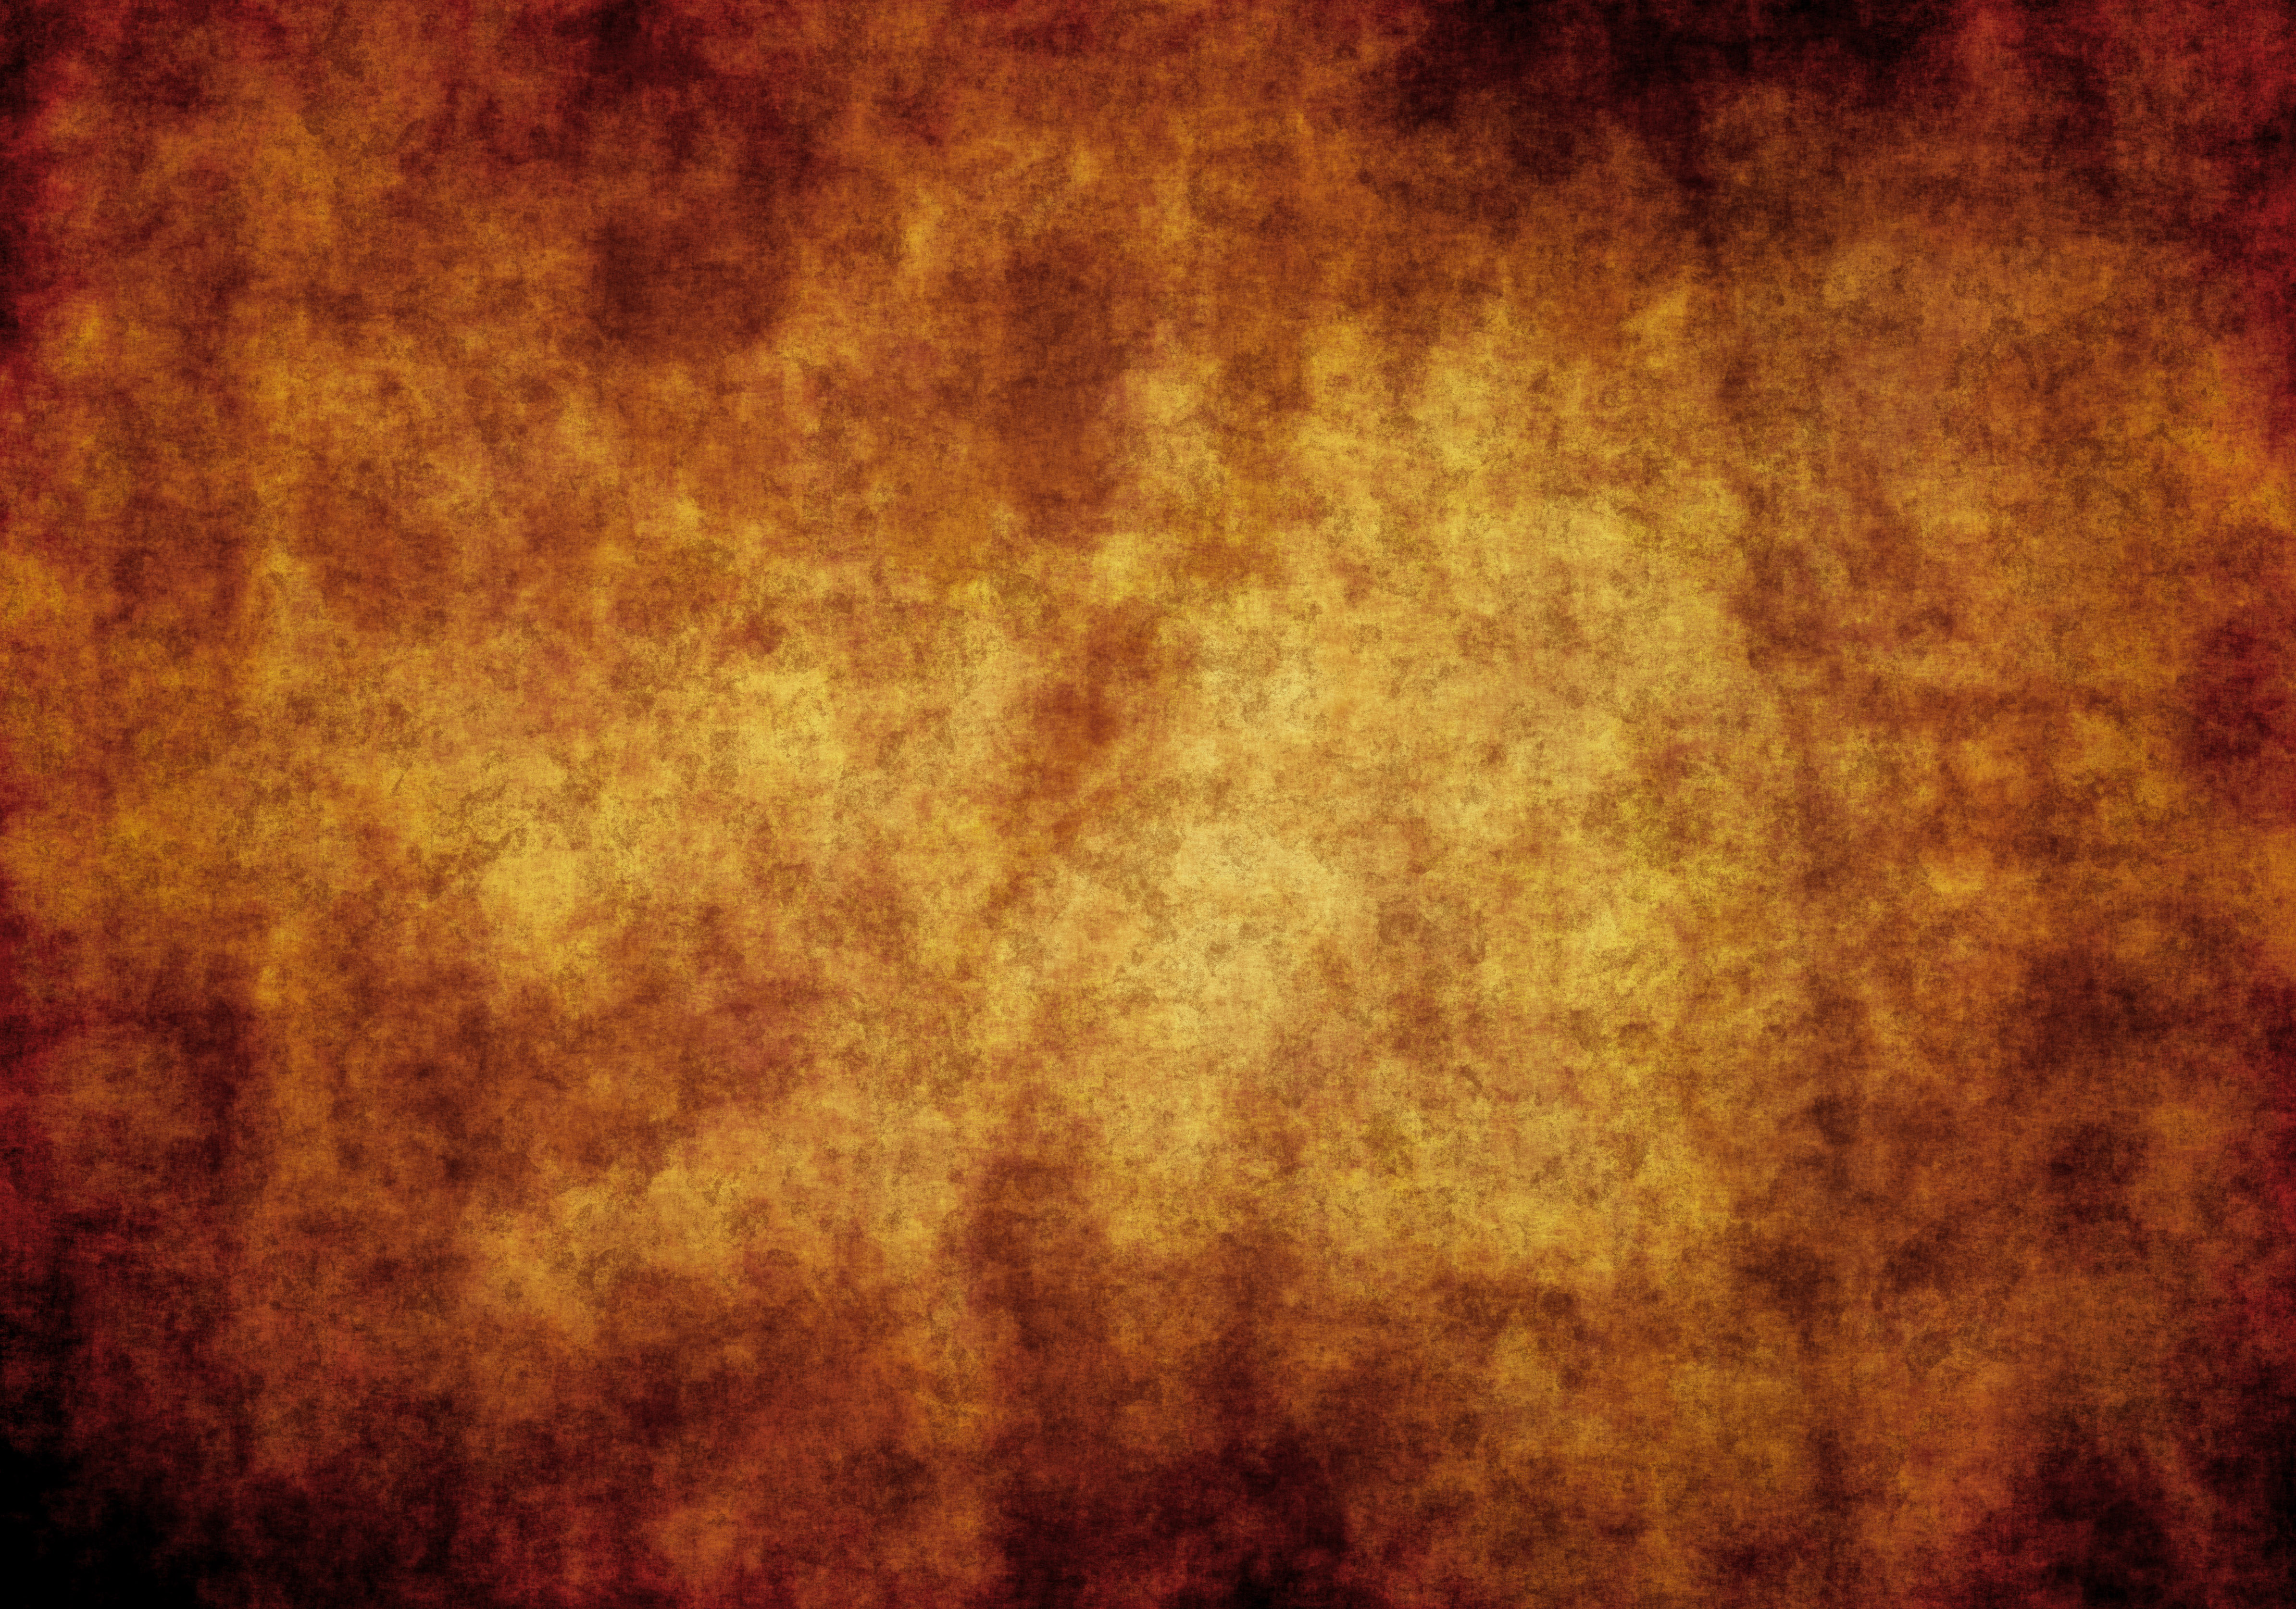 Gallery For Gt Abstract Grunge Background